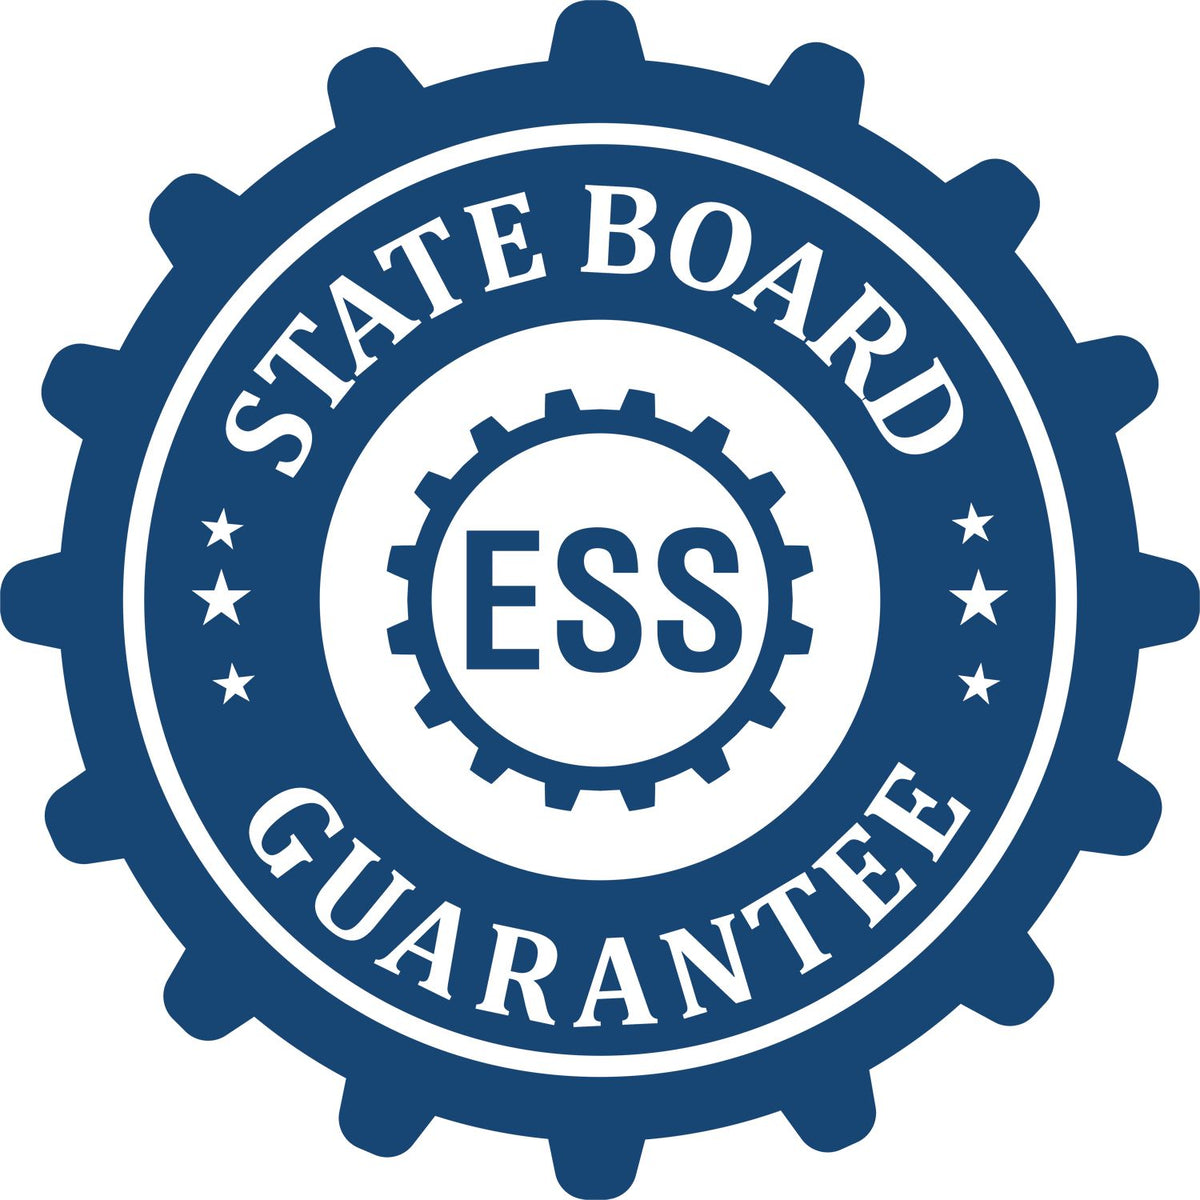 An emblem in a gear shape illustrating a state board guarantee for the Maryland Professional Geologist Seal Stamp